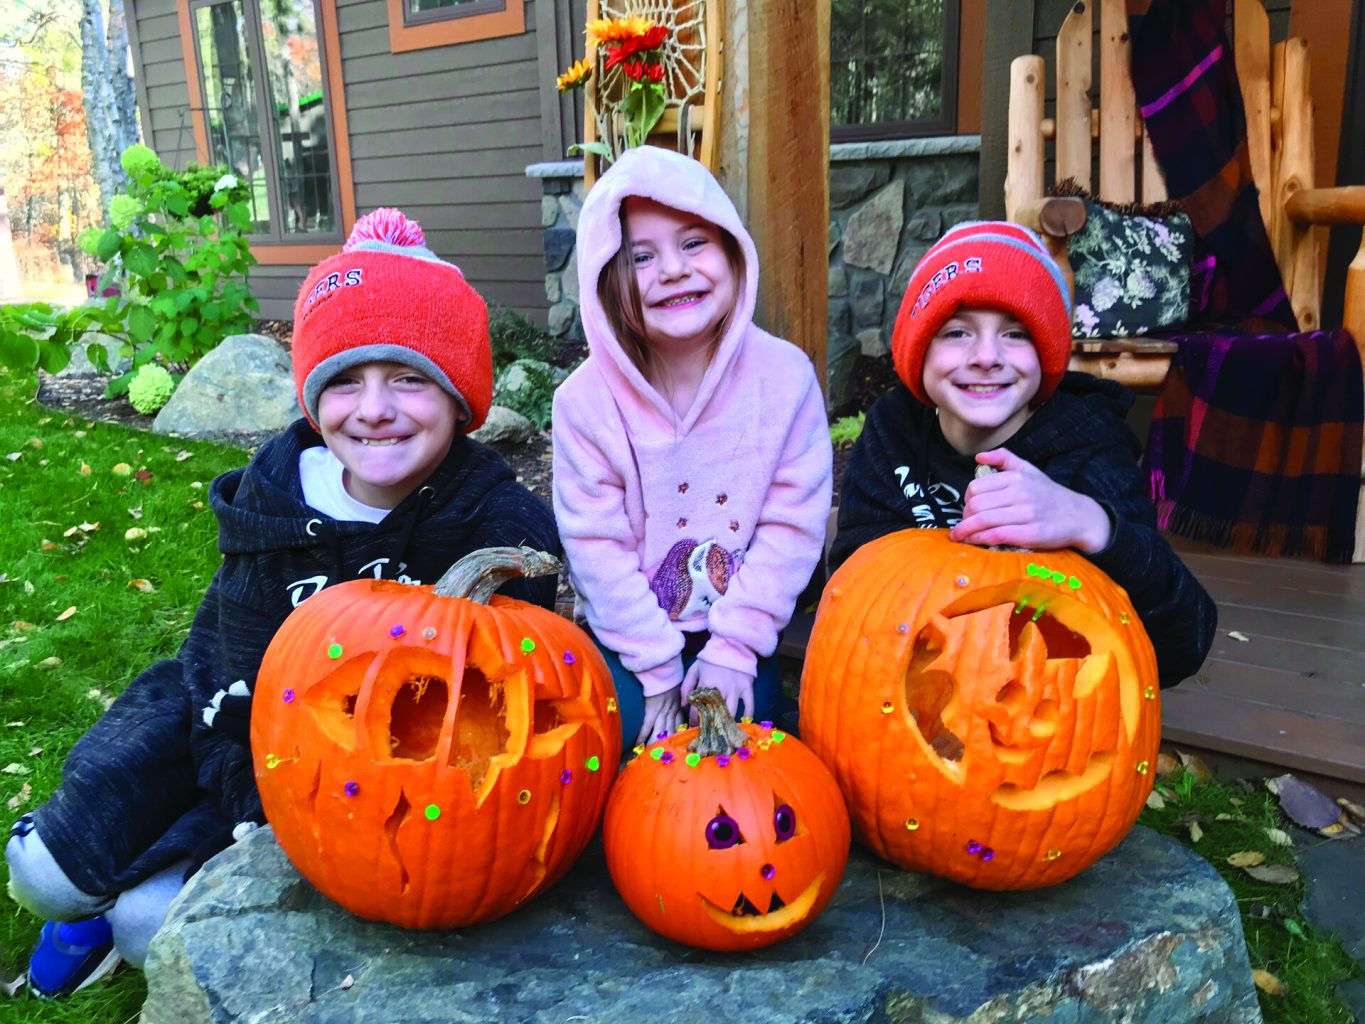 Three kids with big smile with carved pumpkins and costumes